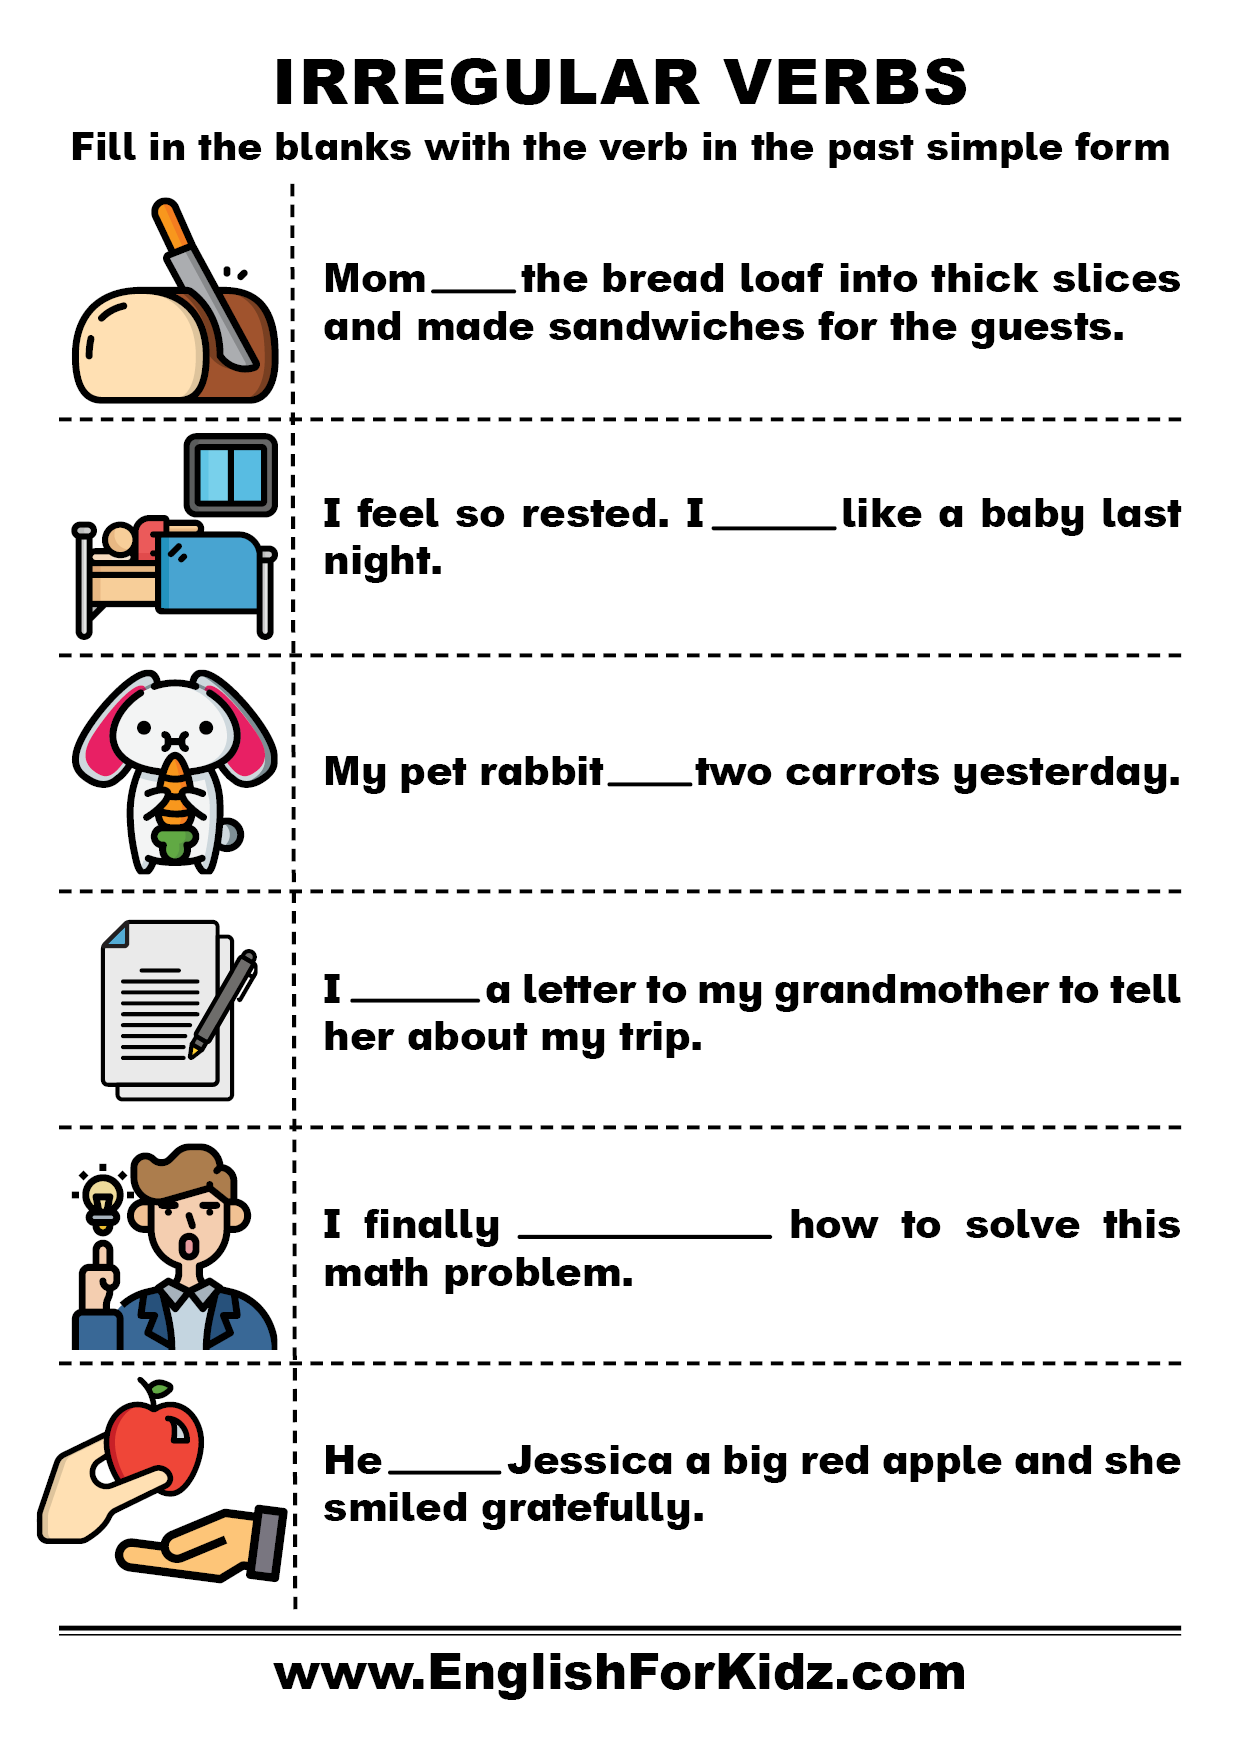 verbs-in-past-tense-english-esl-worksheets-for-distance-learning-and-physical-classrooms-past